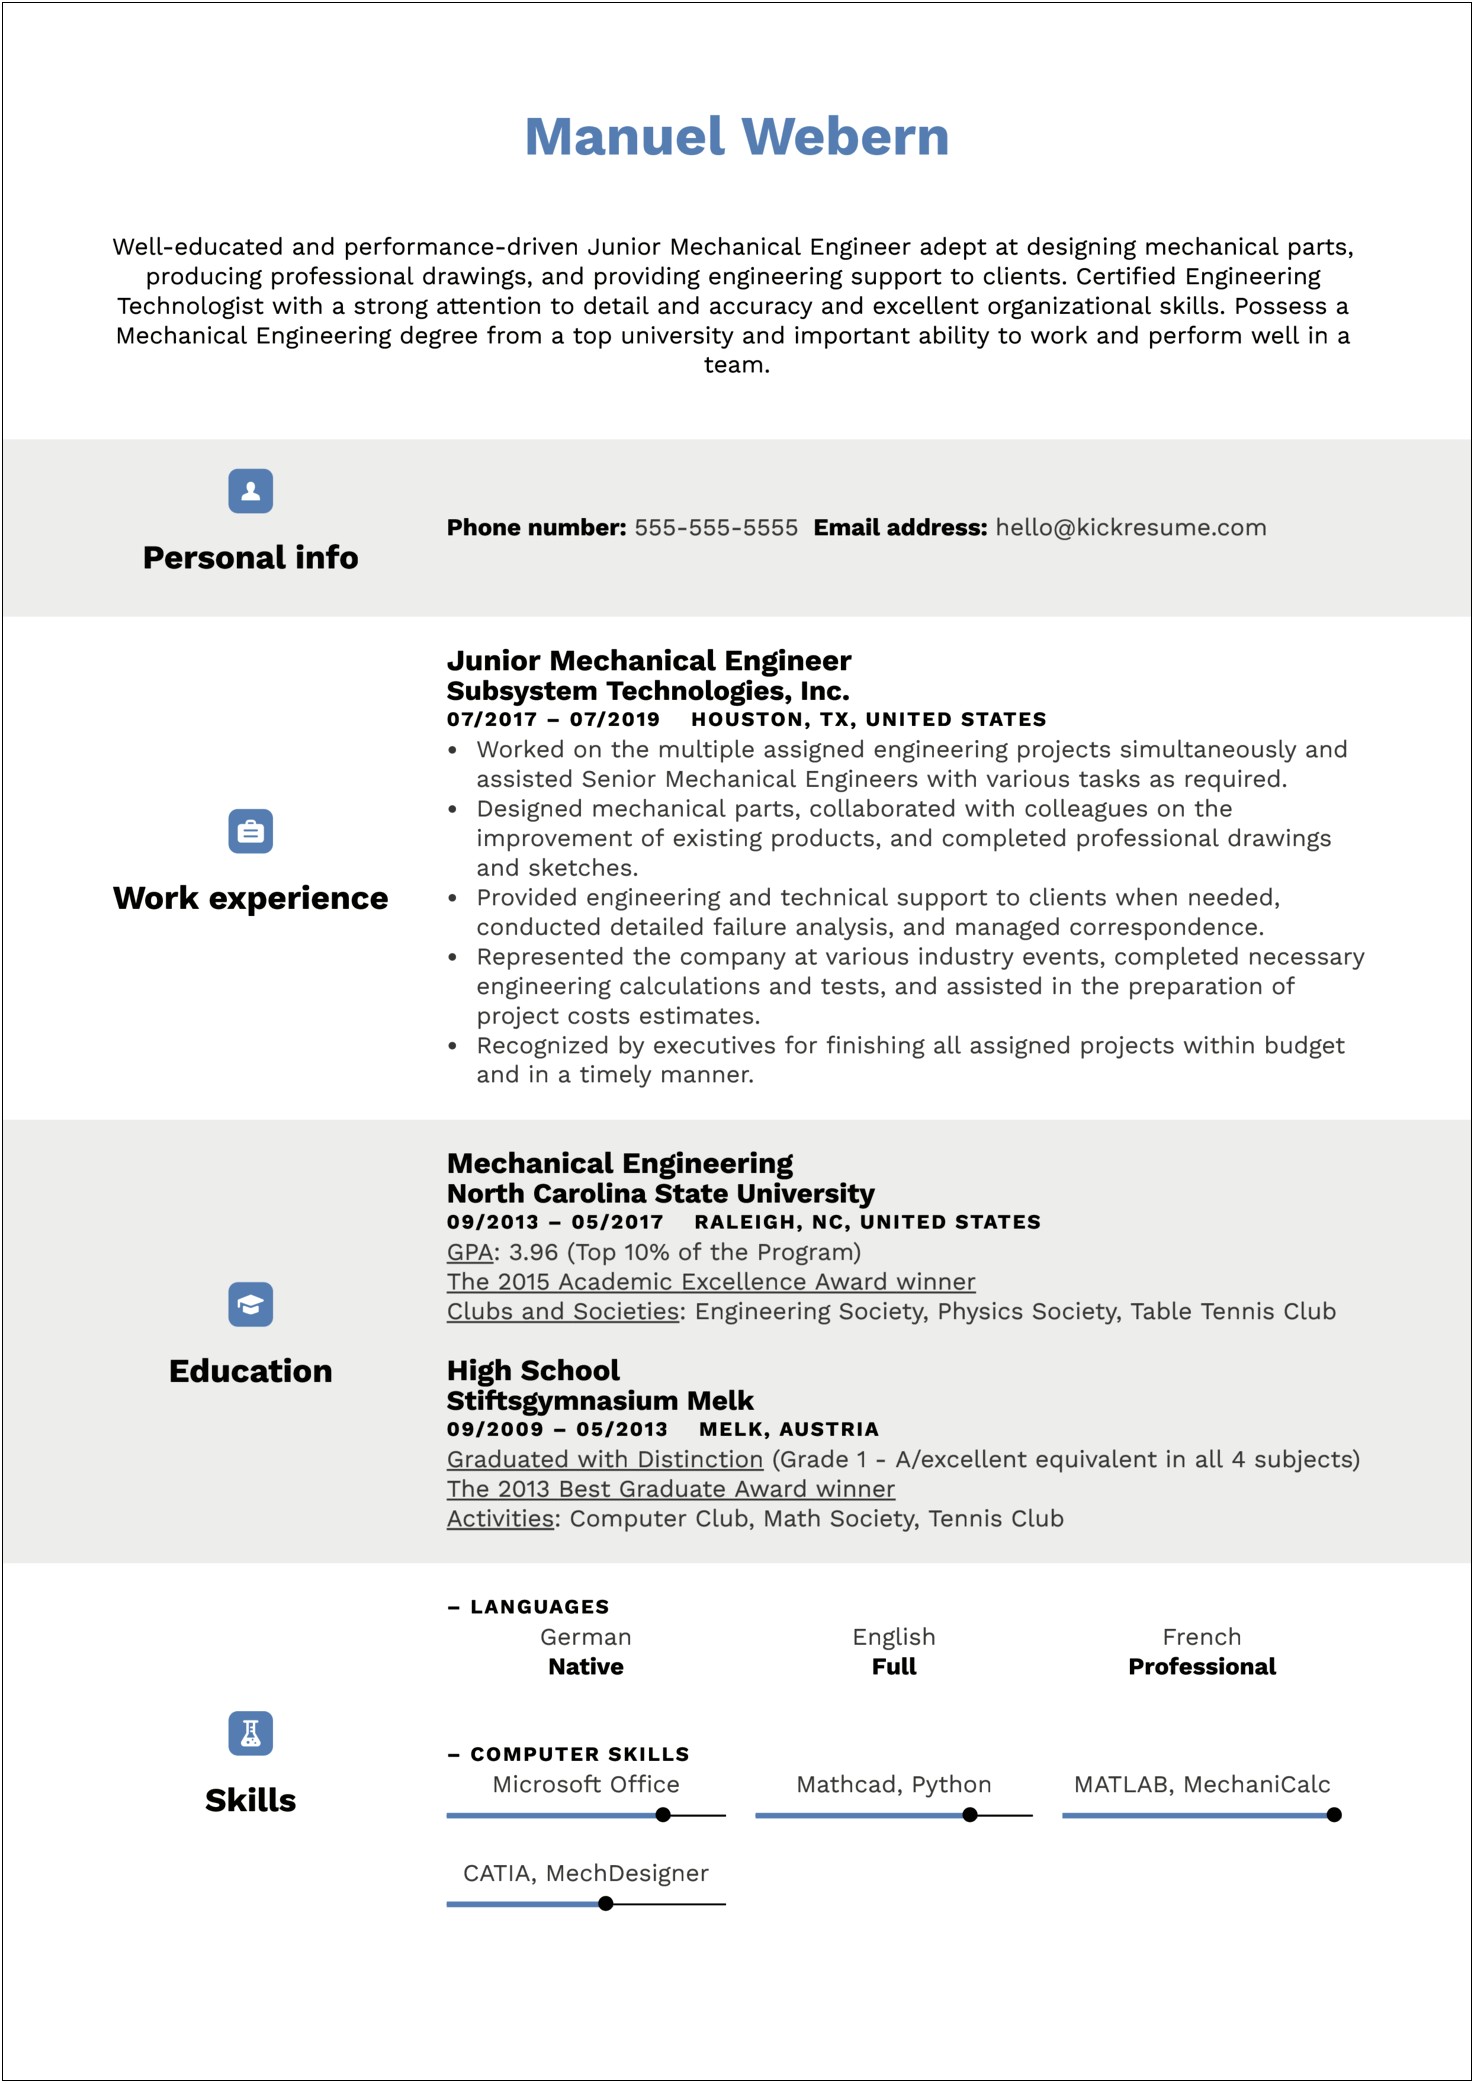 Resume For Mechanical Engineer Without Experience